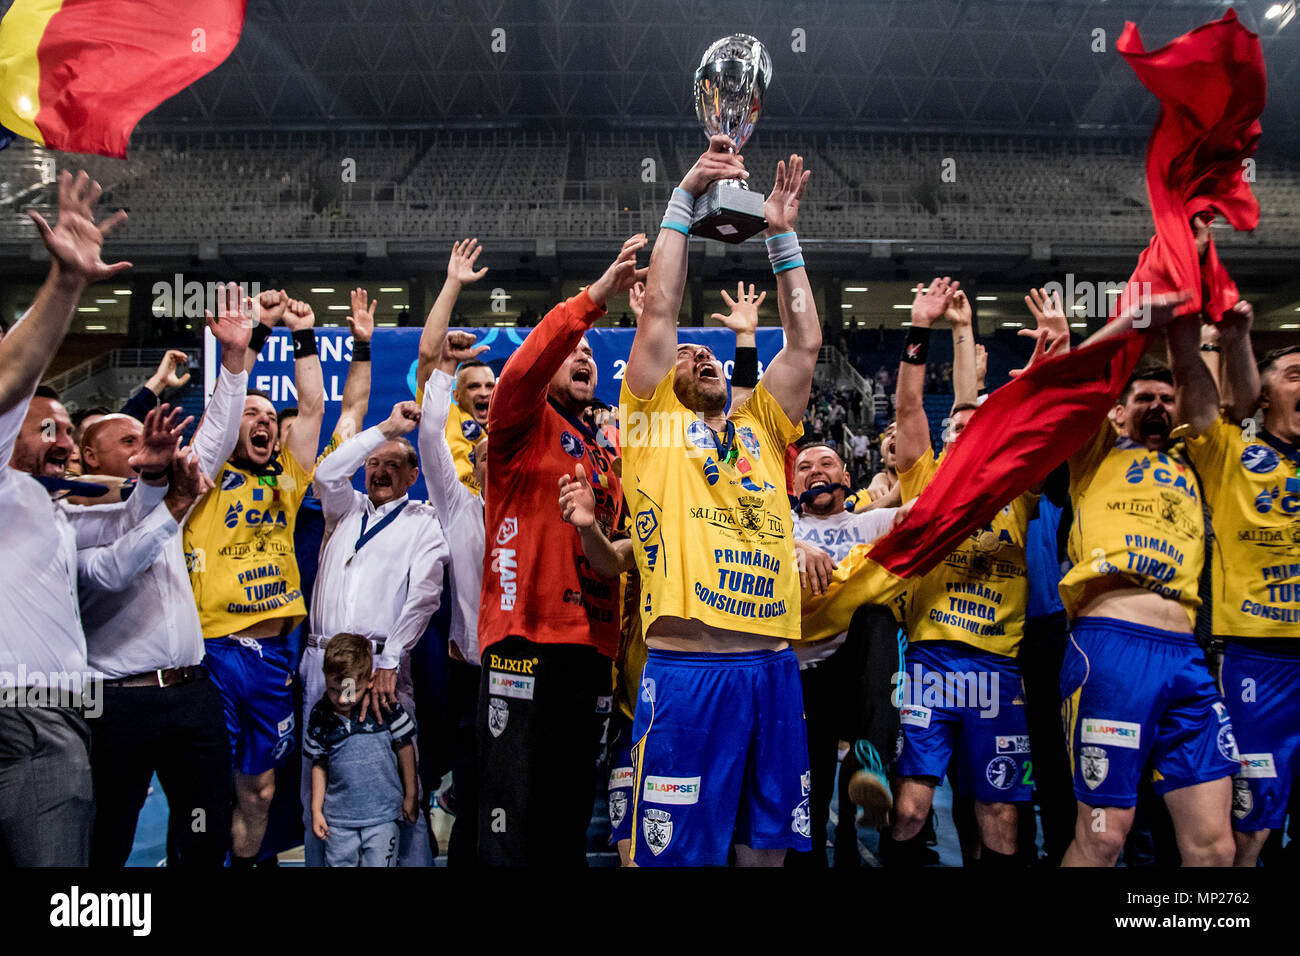 Athens, Greece. 20th May, 2018. AHC Potaissa Turda's players celebrate with the trophy after the EHF Men's Challenge Cup Finals between A.E.K. Athens and AHC Potaissa Turda in Athens, Greece, May 20, 2018. Credit: Panagiotis Moschandreou/Xinhua/Alamy Live News Stock Photo